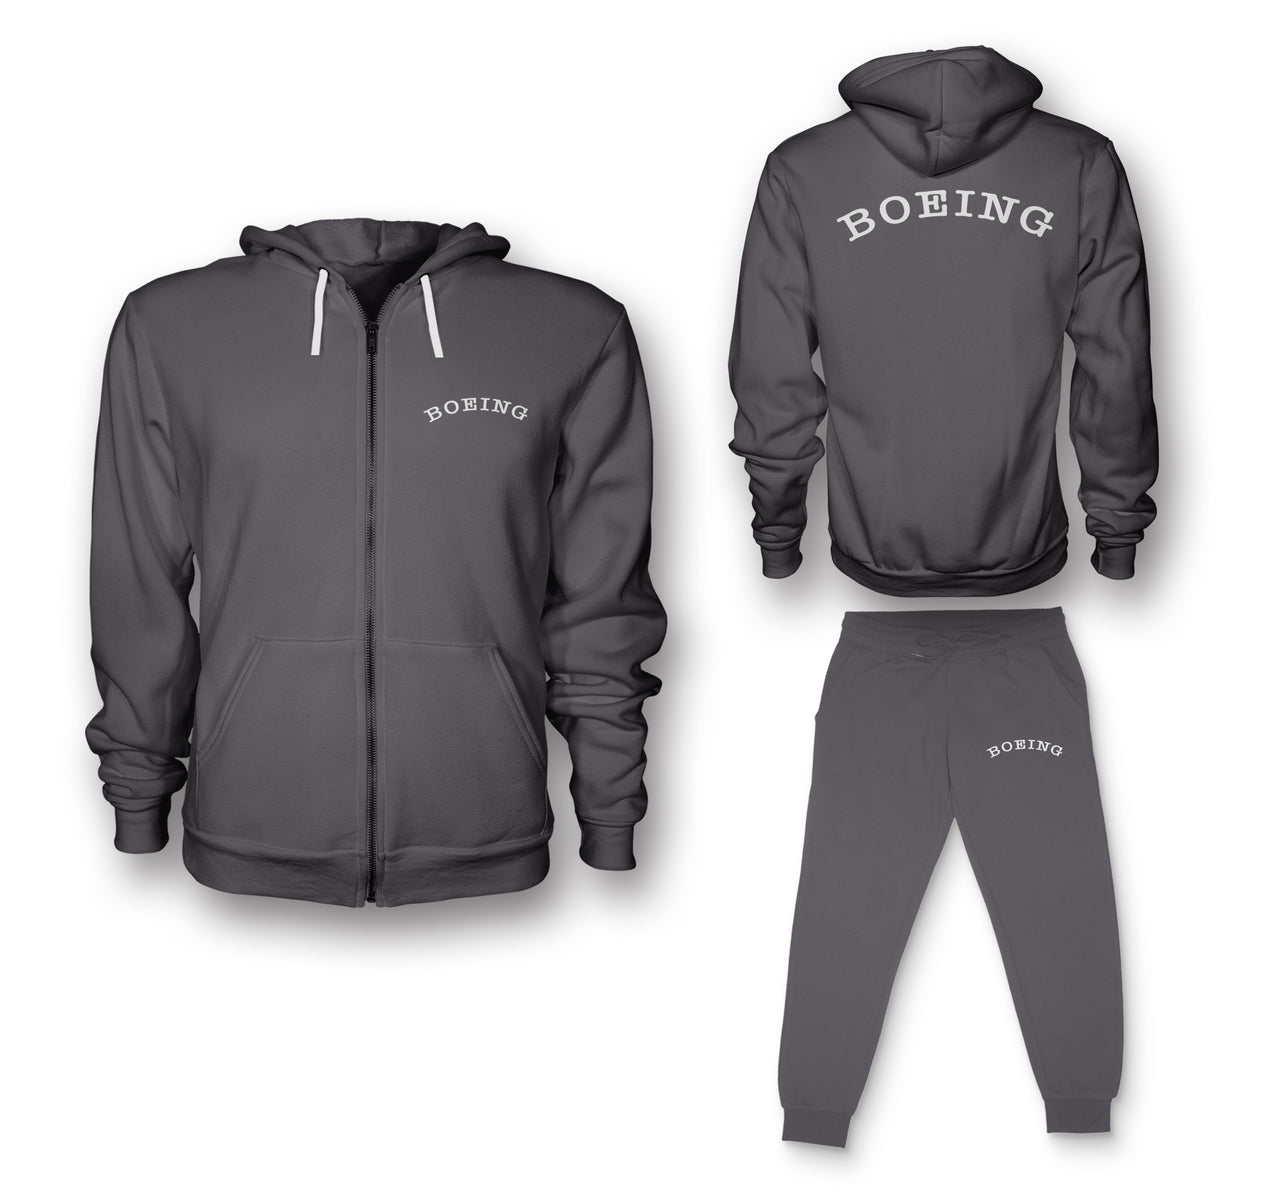 Special BOEING Text Designed Zipped Hoodies & Sweatpants Set